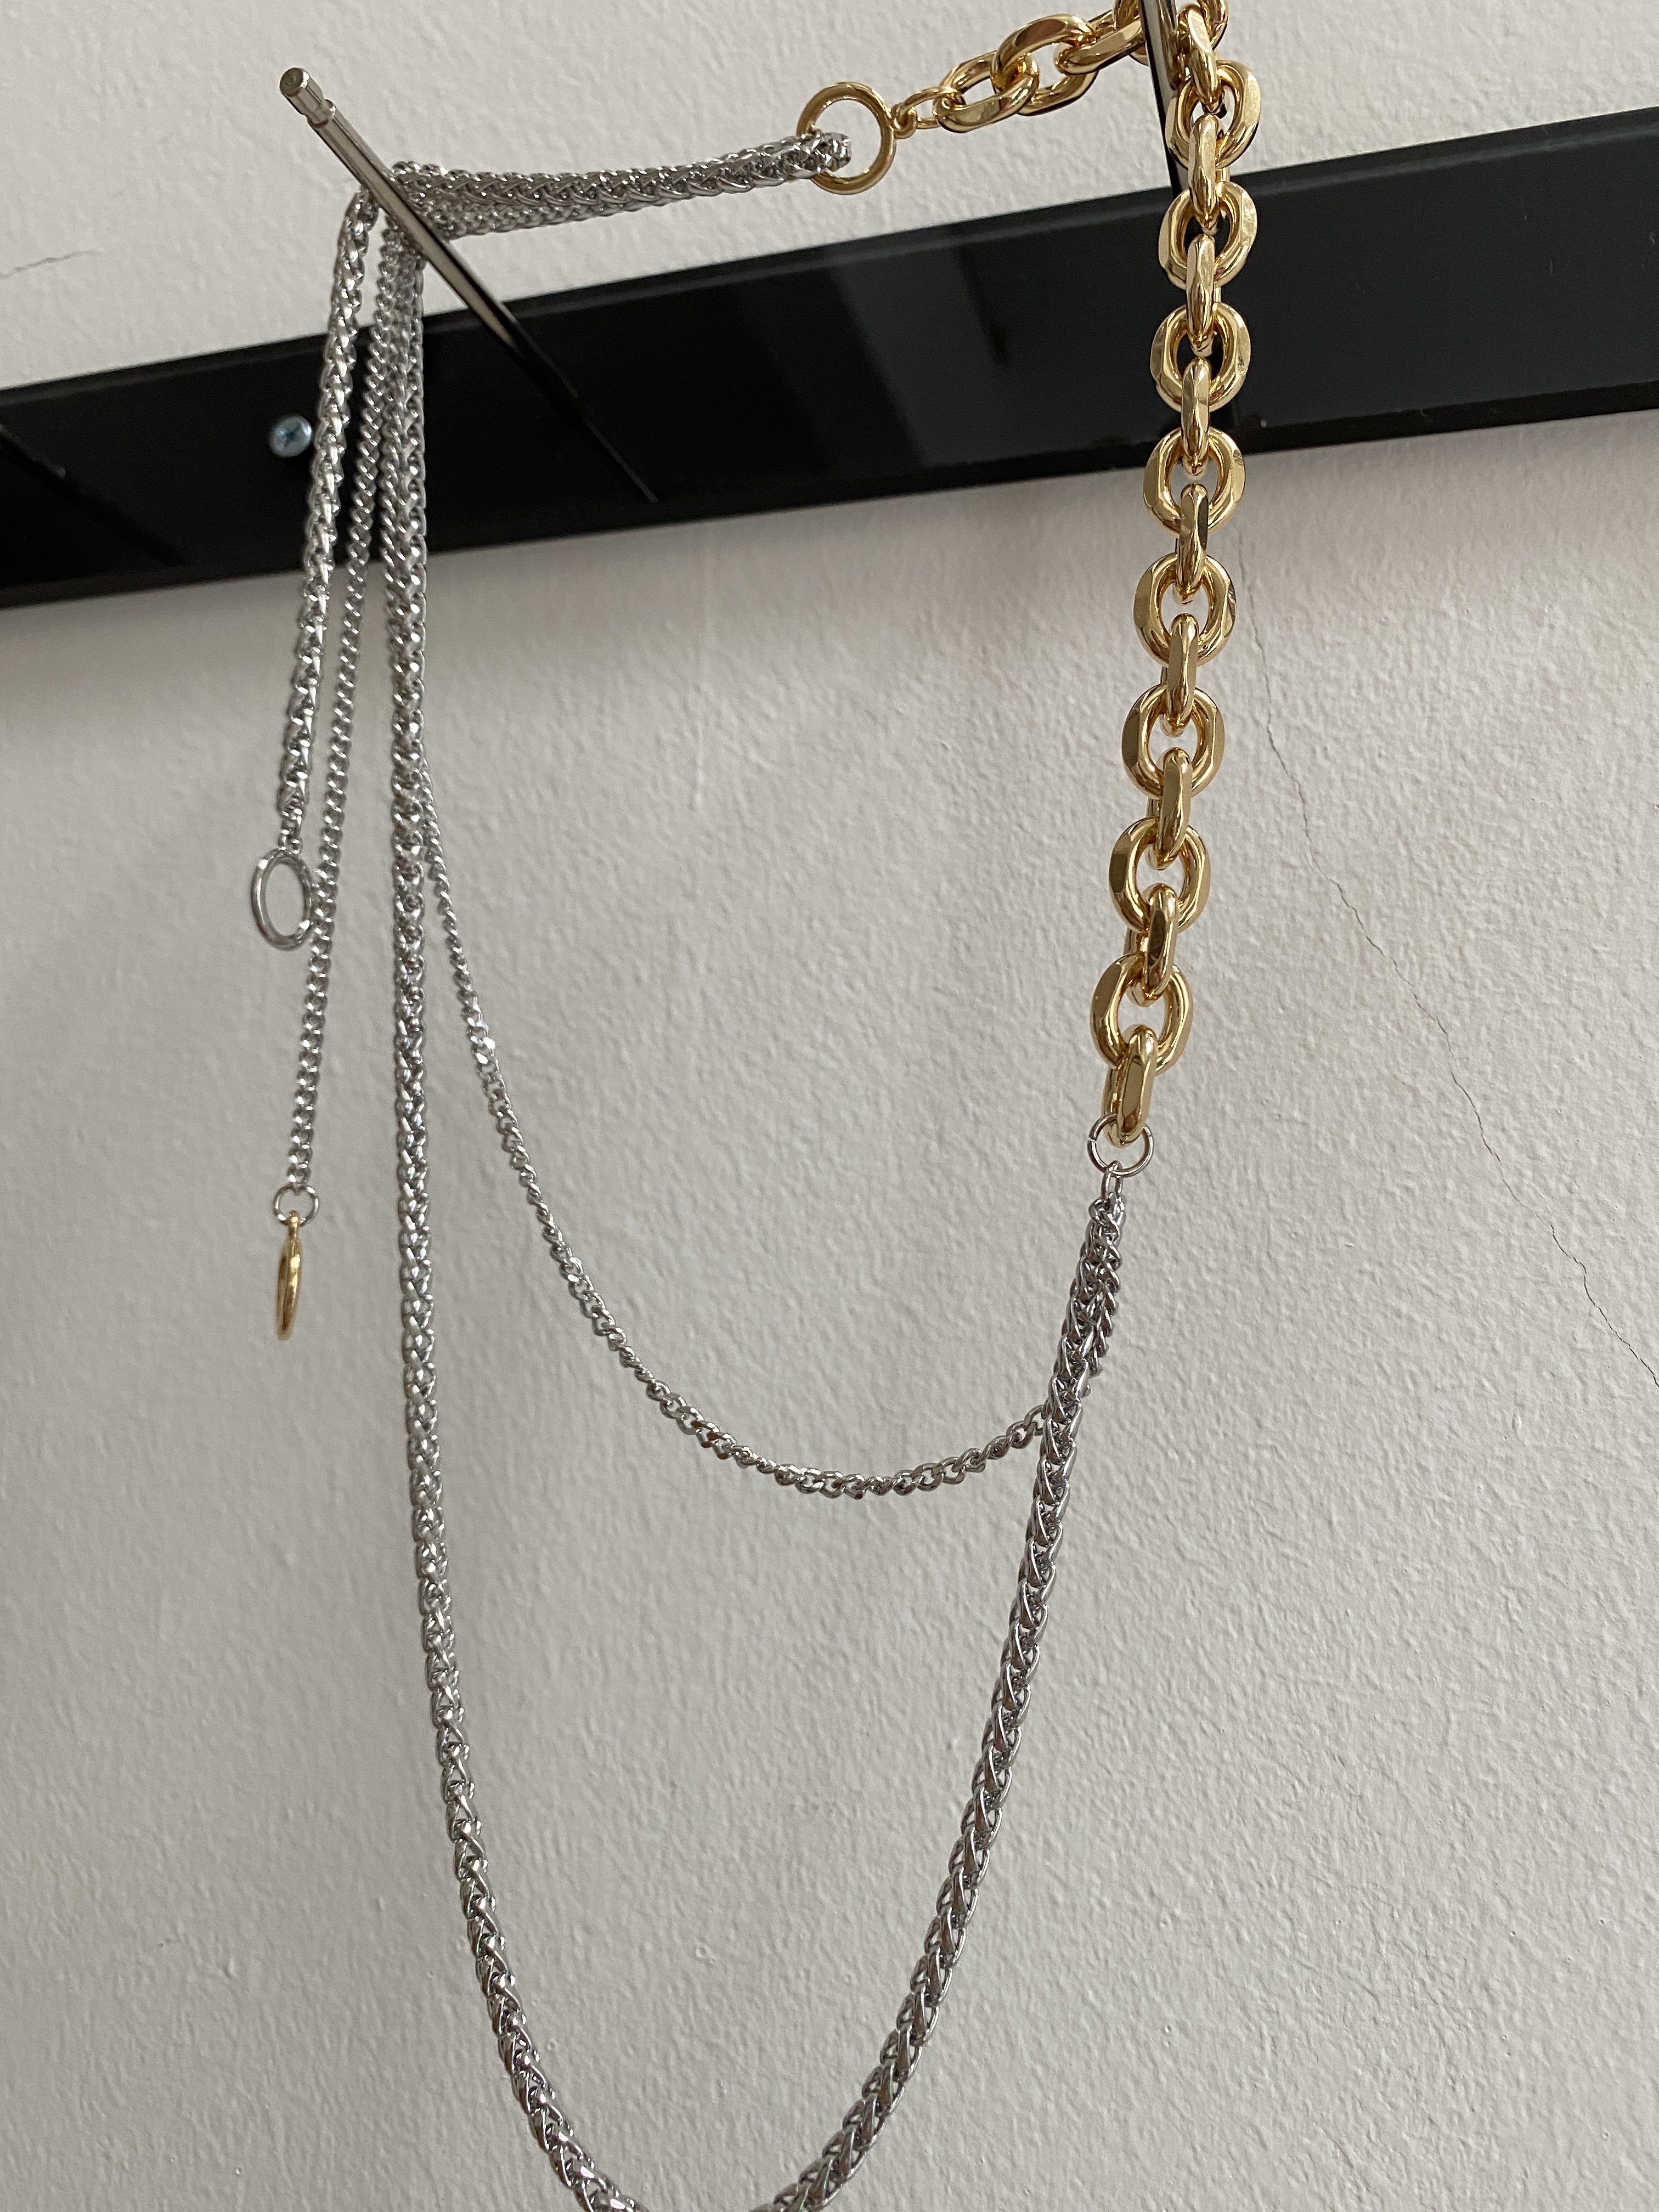 Layered long chunky chains necklace